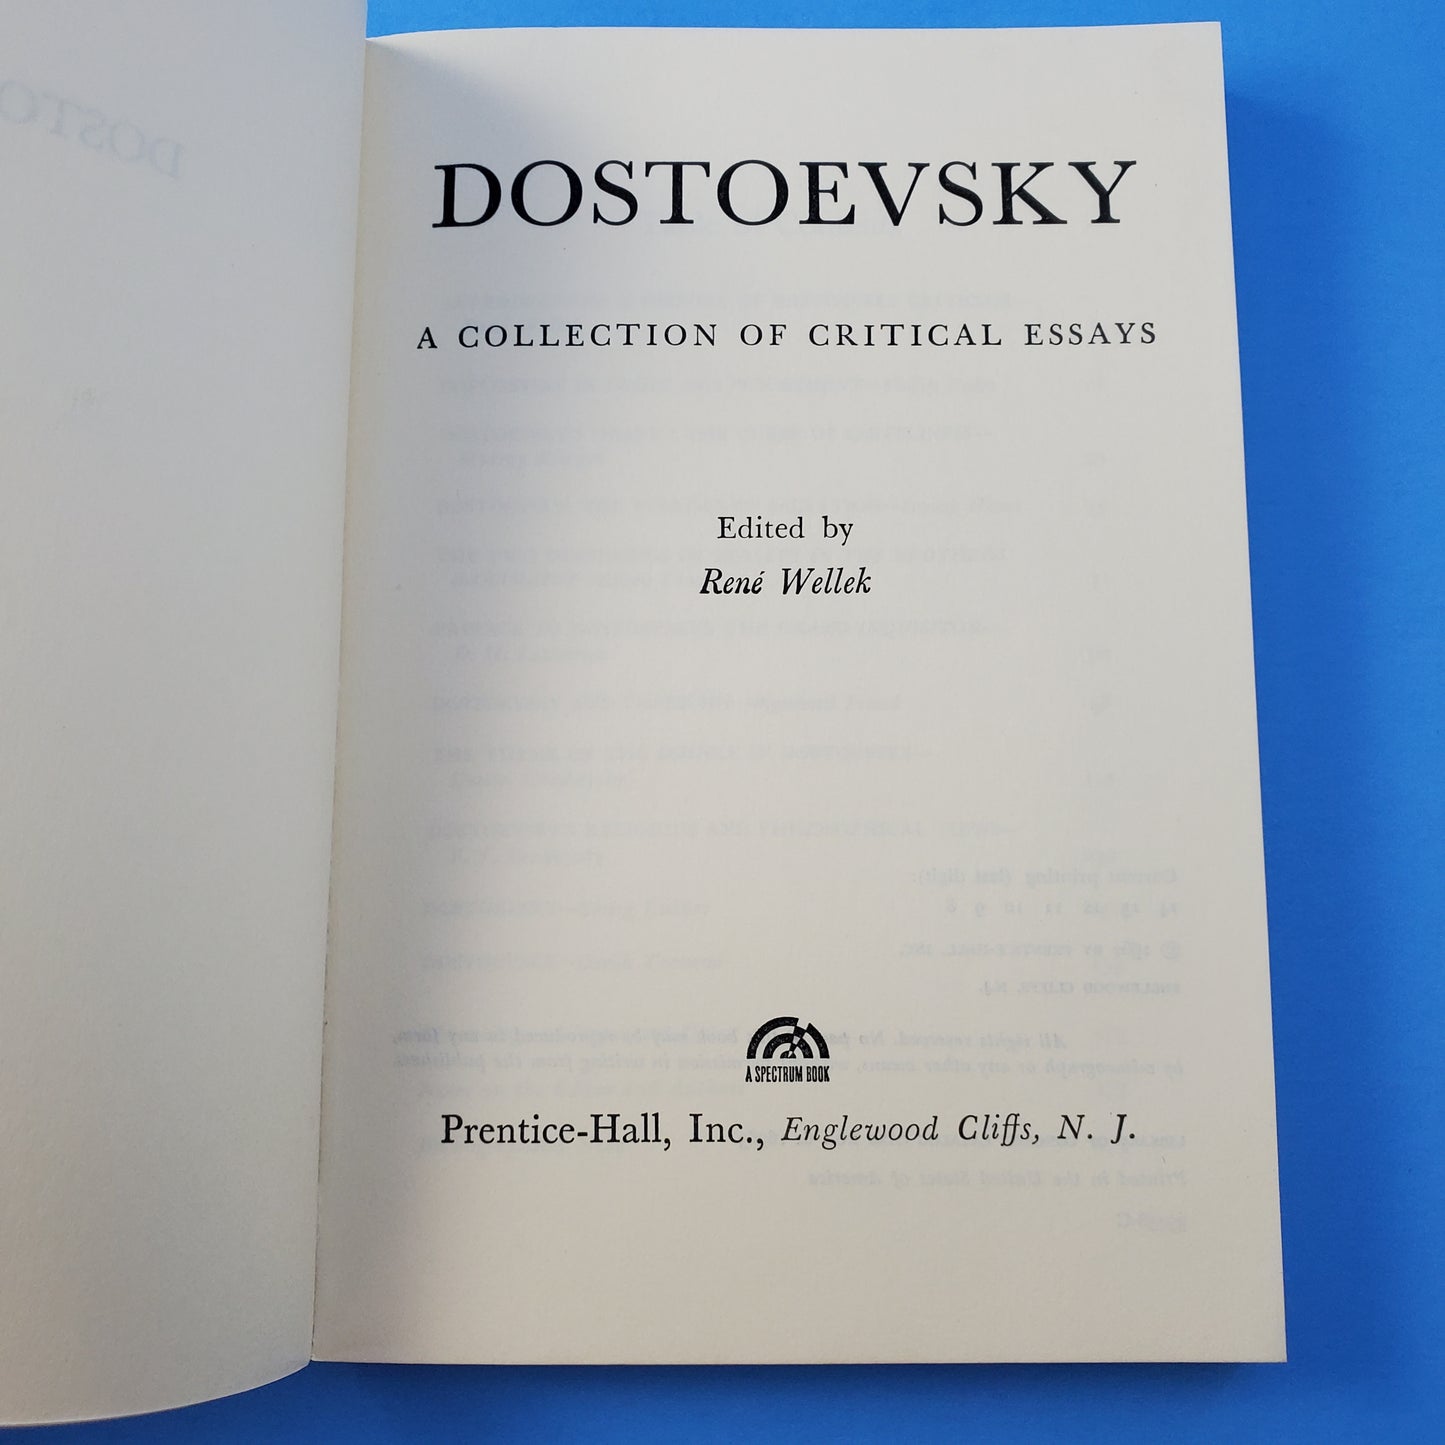 Dostoevsky: A Collection of Critical Essays